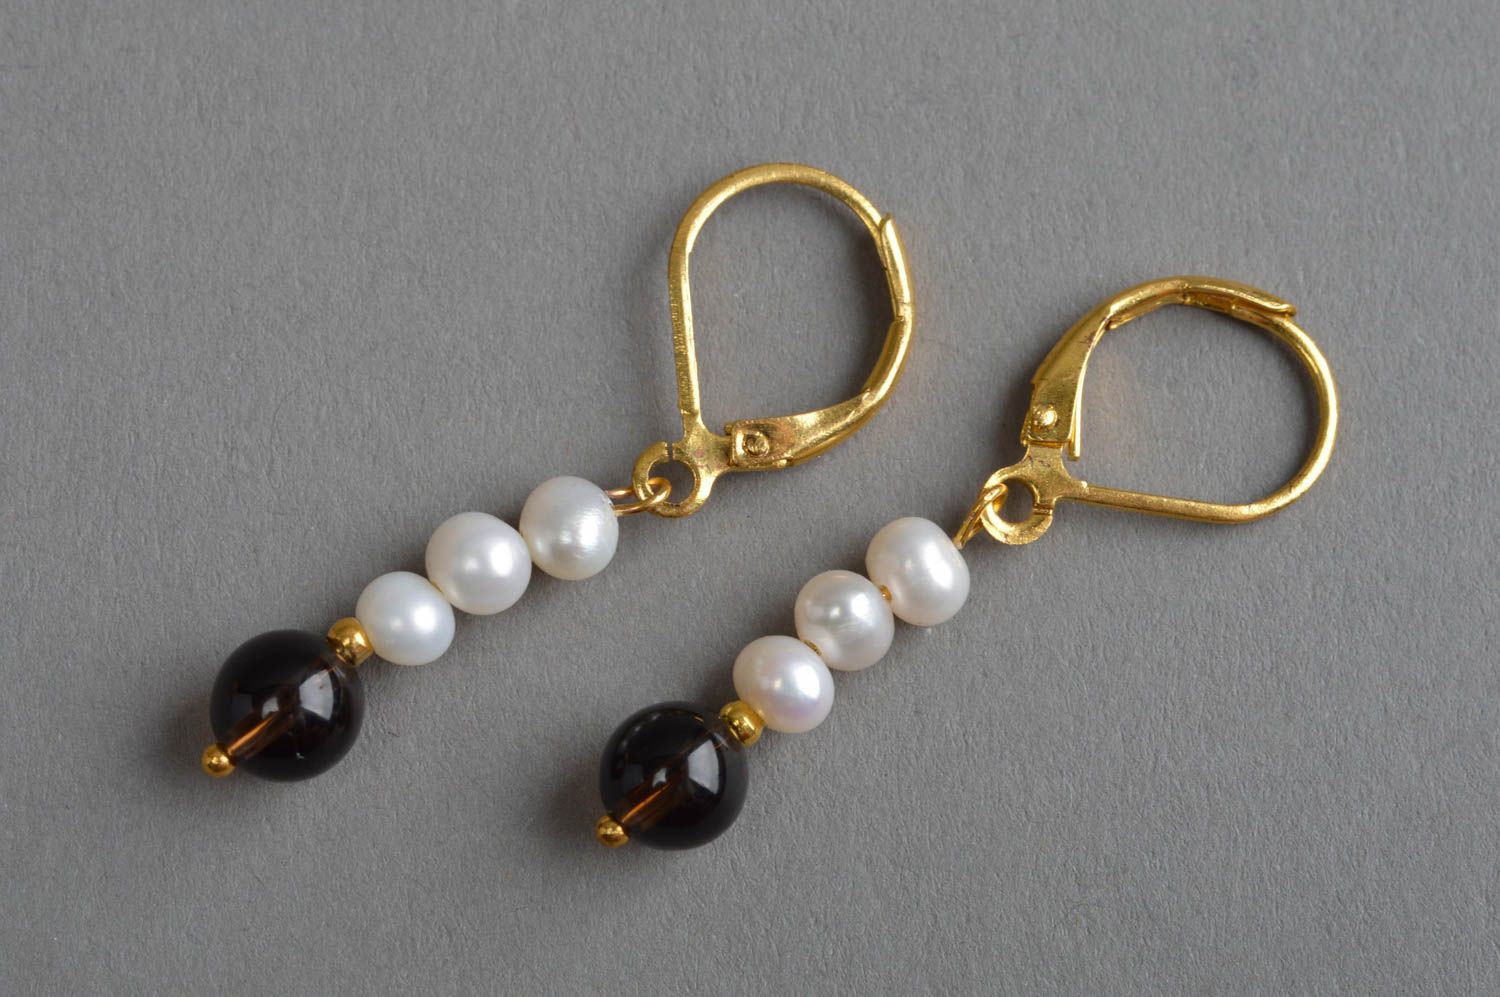 Handmade quartz earrings accessory with river pearls unusual stylish jewelry photo 2